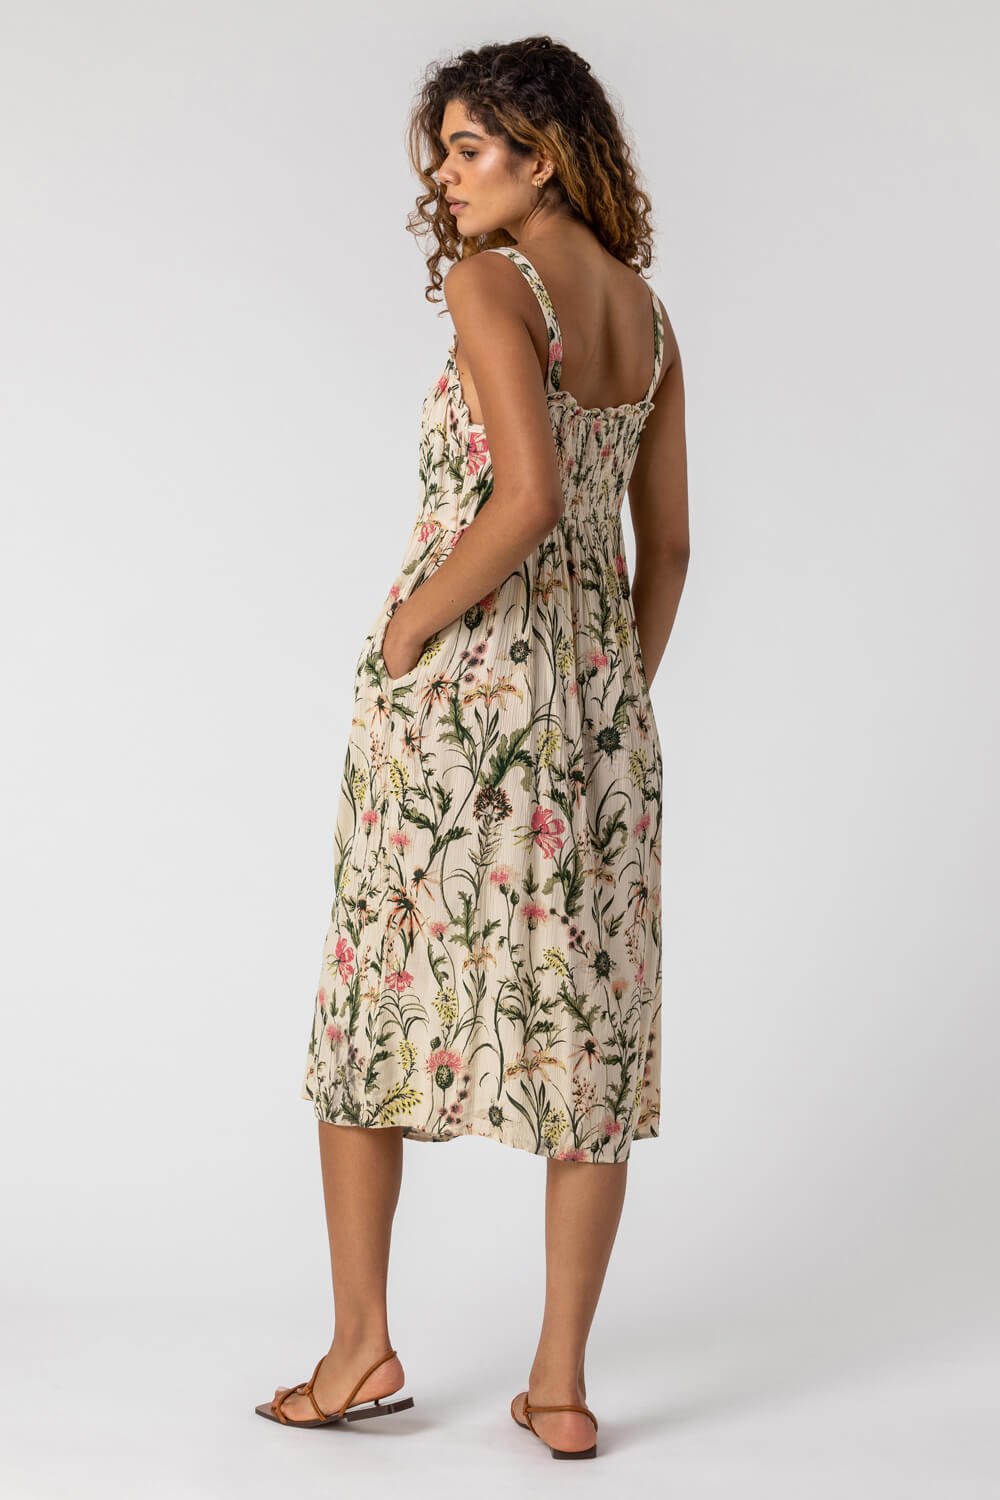 Ivory  Floral Print Button Down Sun Dress, Image 2 of 5